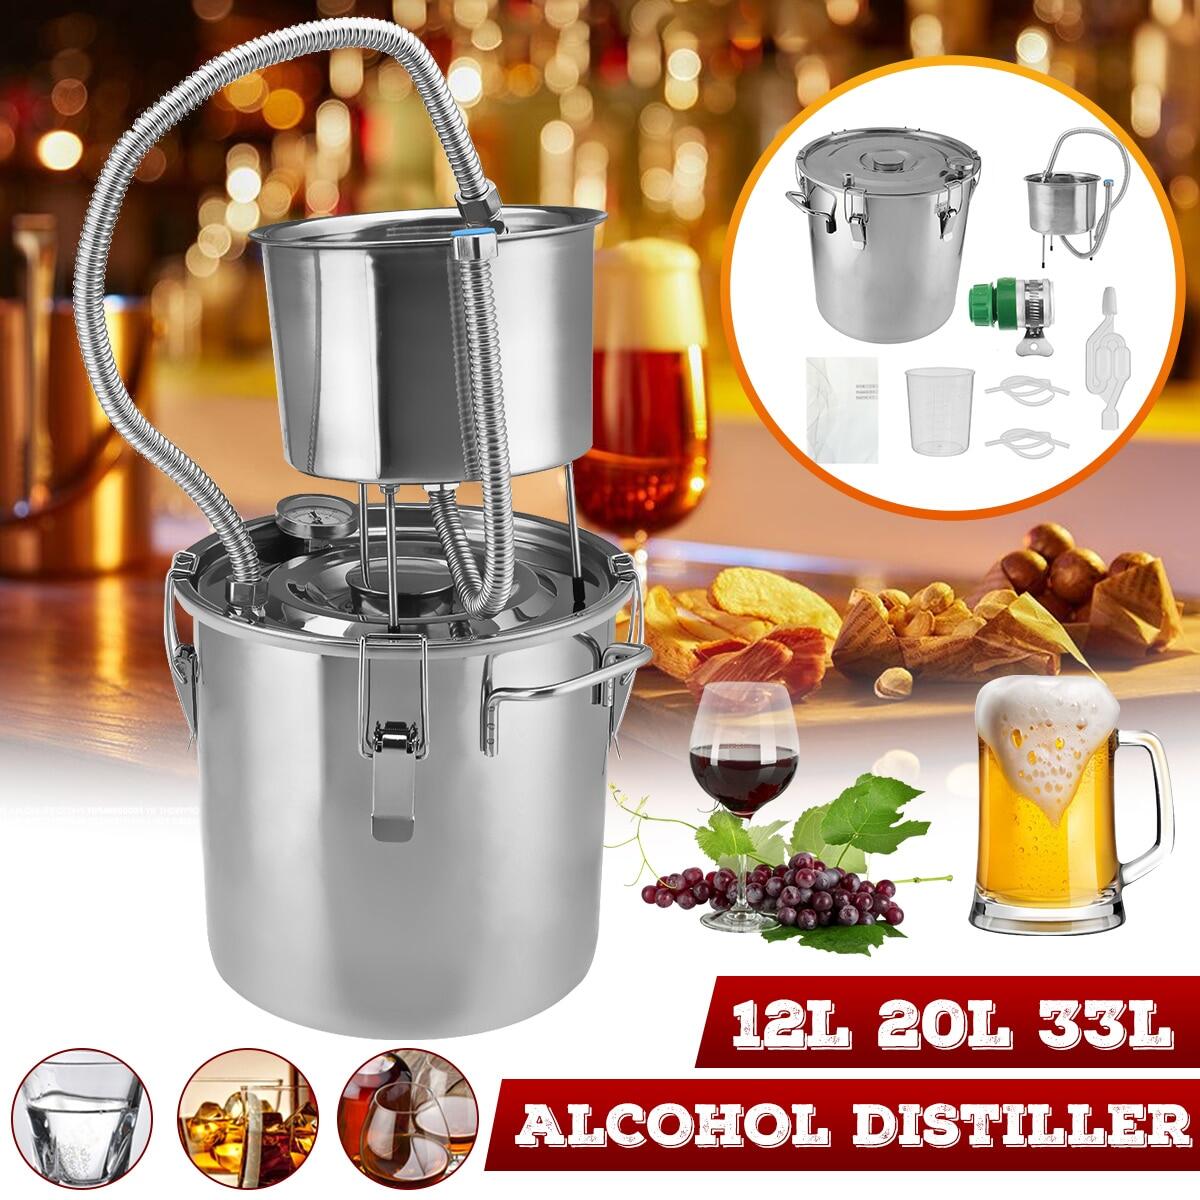 3Gal & 12L 3/5/8Gal & 12/20/33L Copper Tube Home Brew Wine Making Kit Moonshine Still Spirits Water Alcohol Distiller Stainless Steel Oil Boiler with Automatic Pressure Relief Valve Thermometer